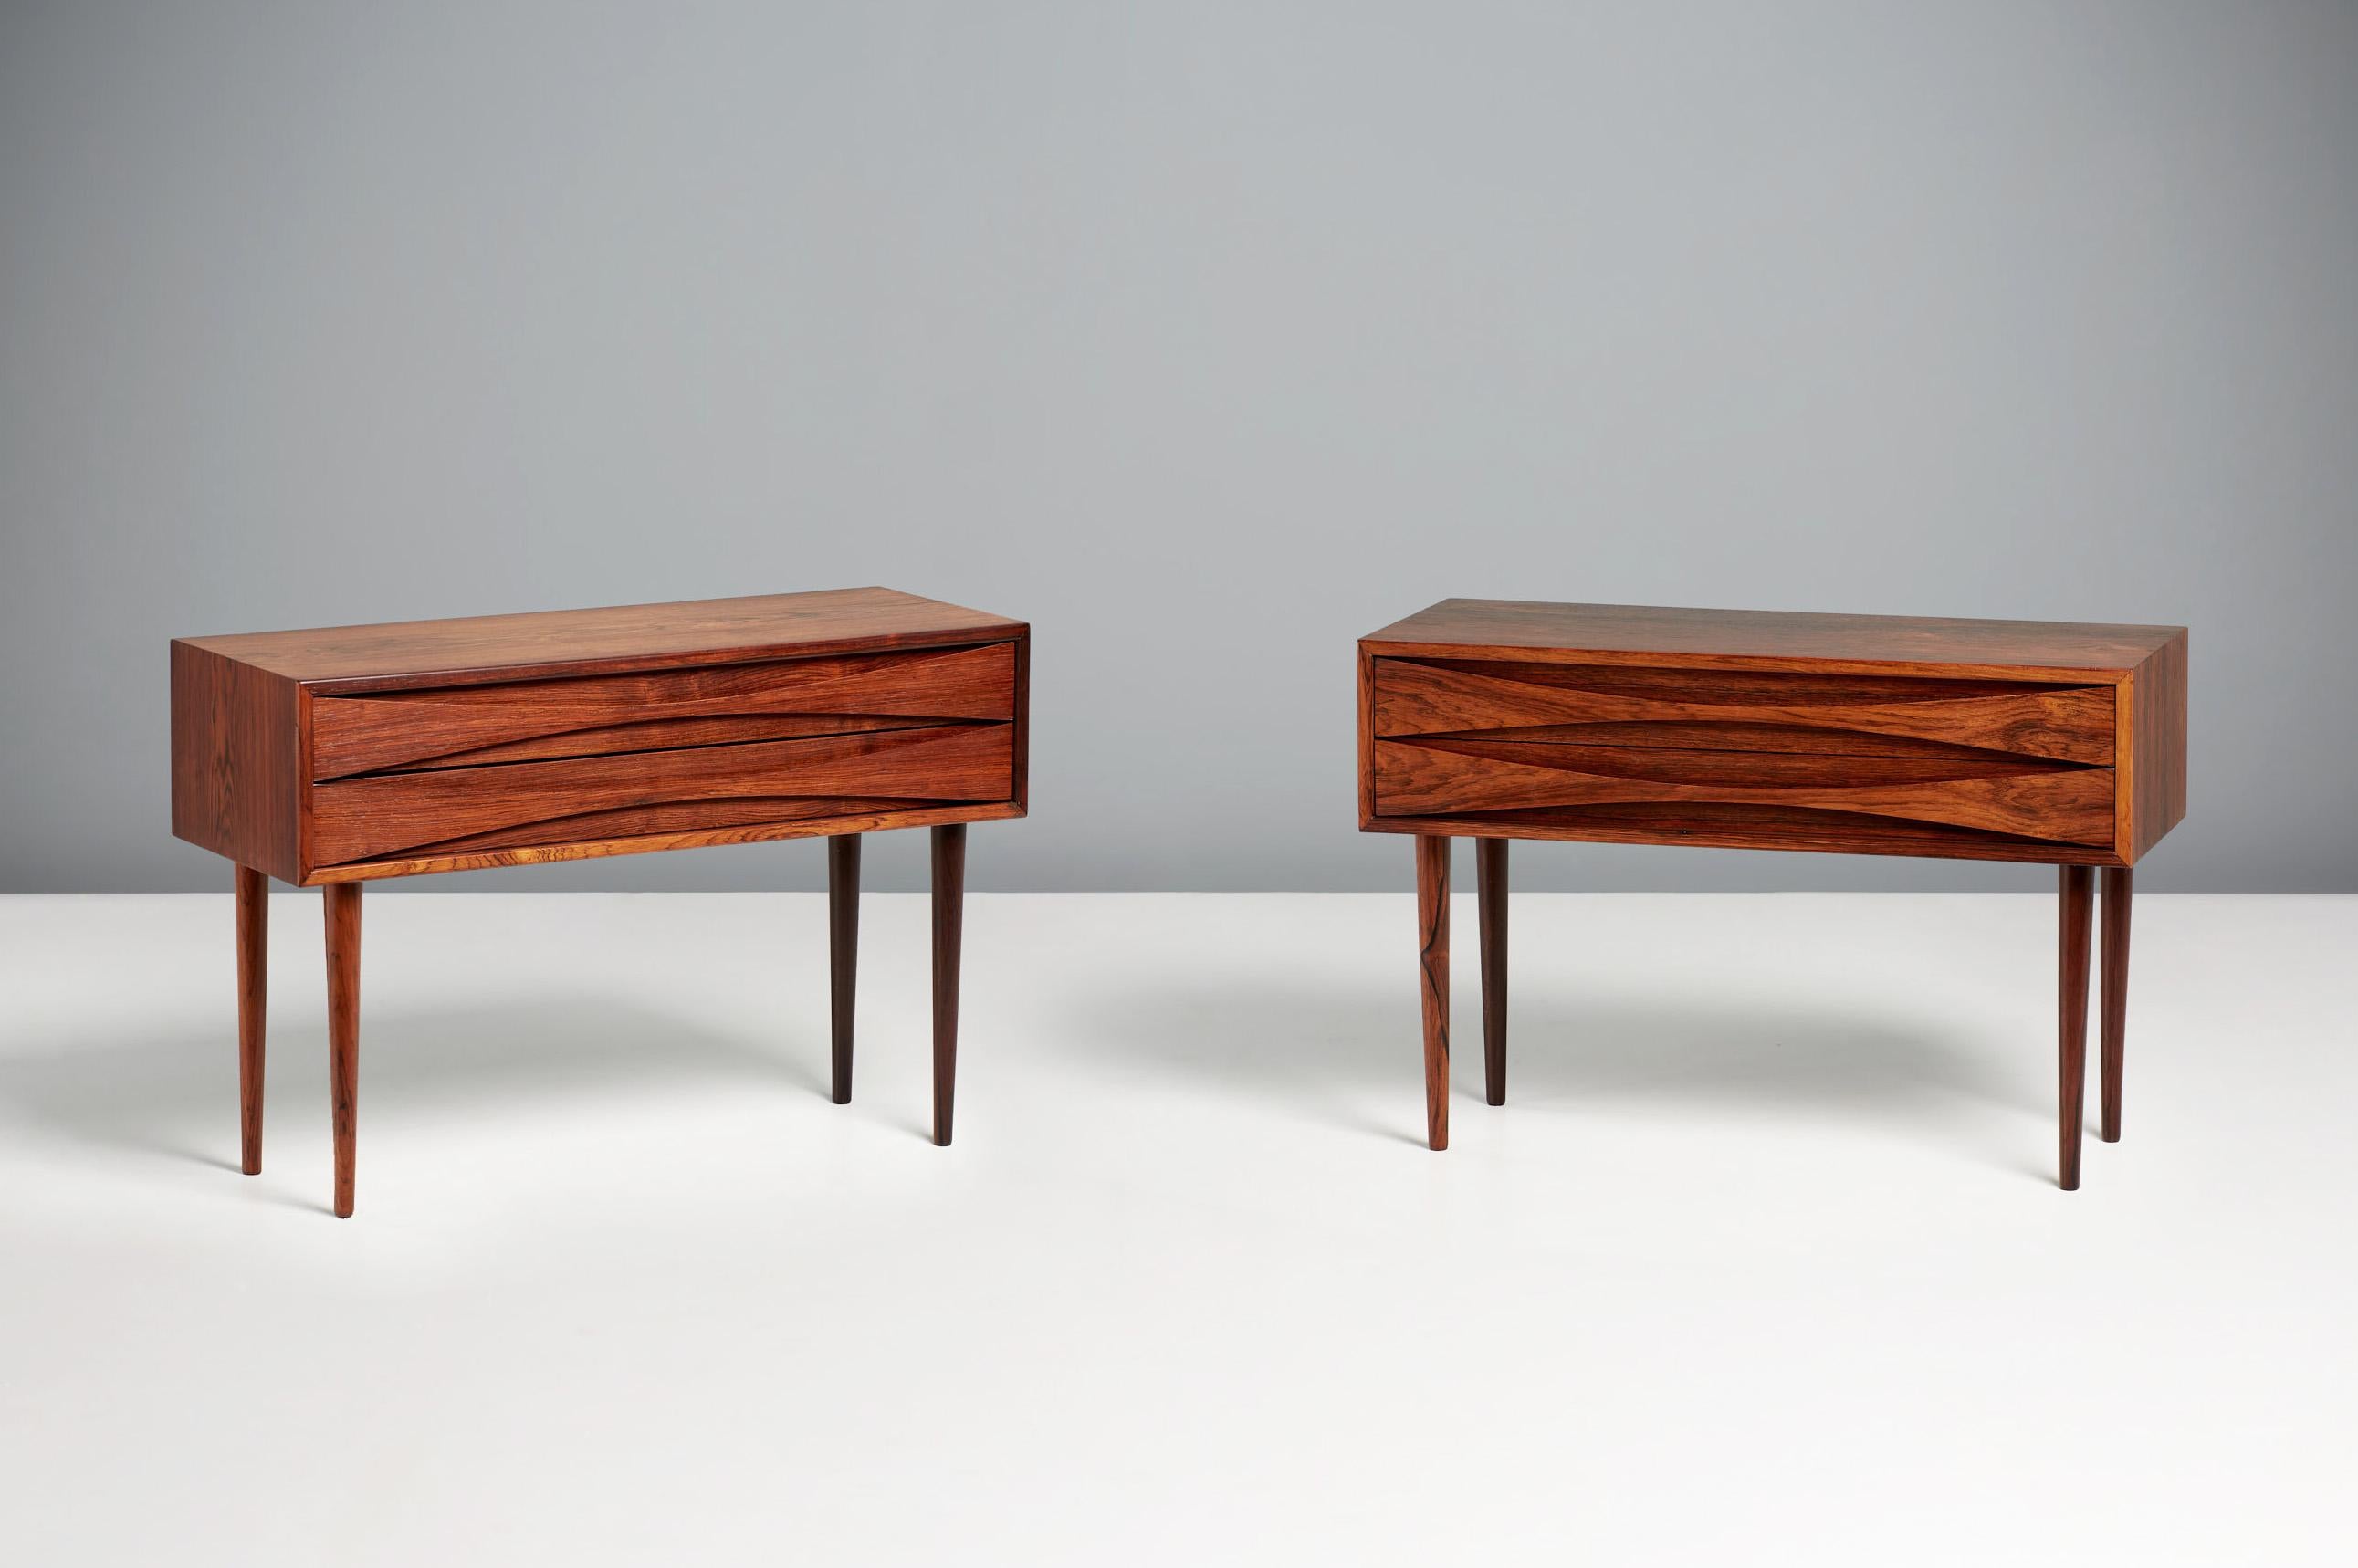 Niels Clausen Wide Bedside Chests, c1960s

Wide Rosewood cabinets by Niels Clausen for his own company: NC Mobler in Odense, Denmark. Produced c1960. Two drawers per cabinet with scalloped pulls and solid tapered legs. Oak lined drawers and